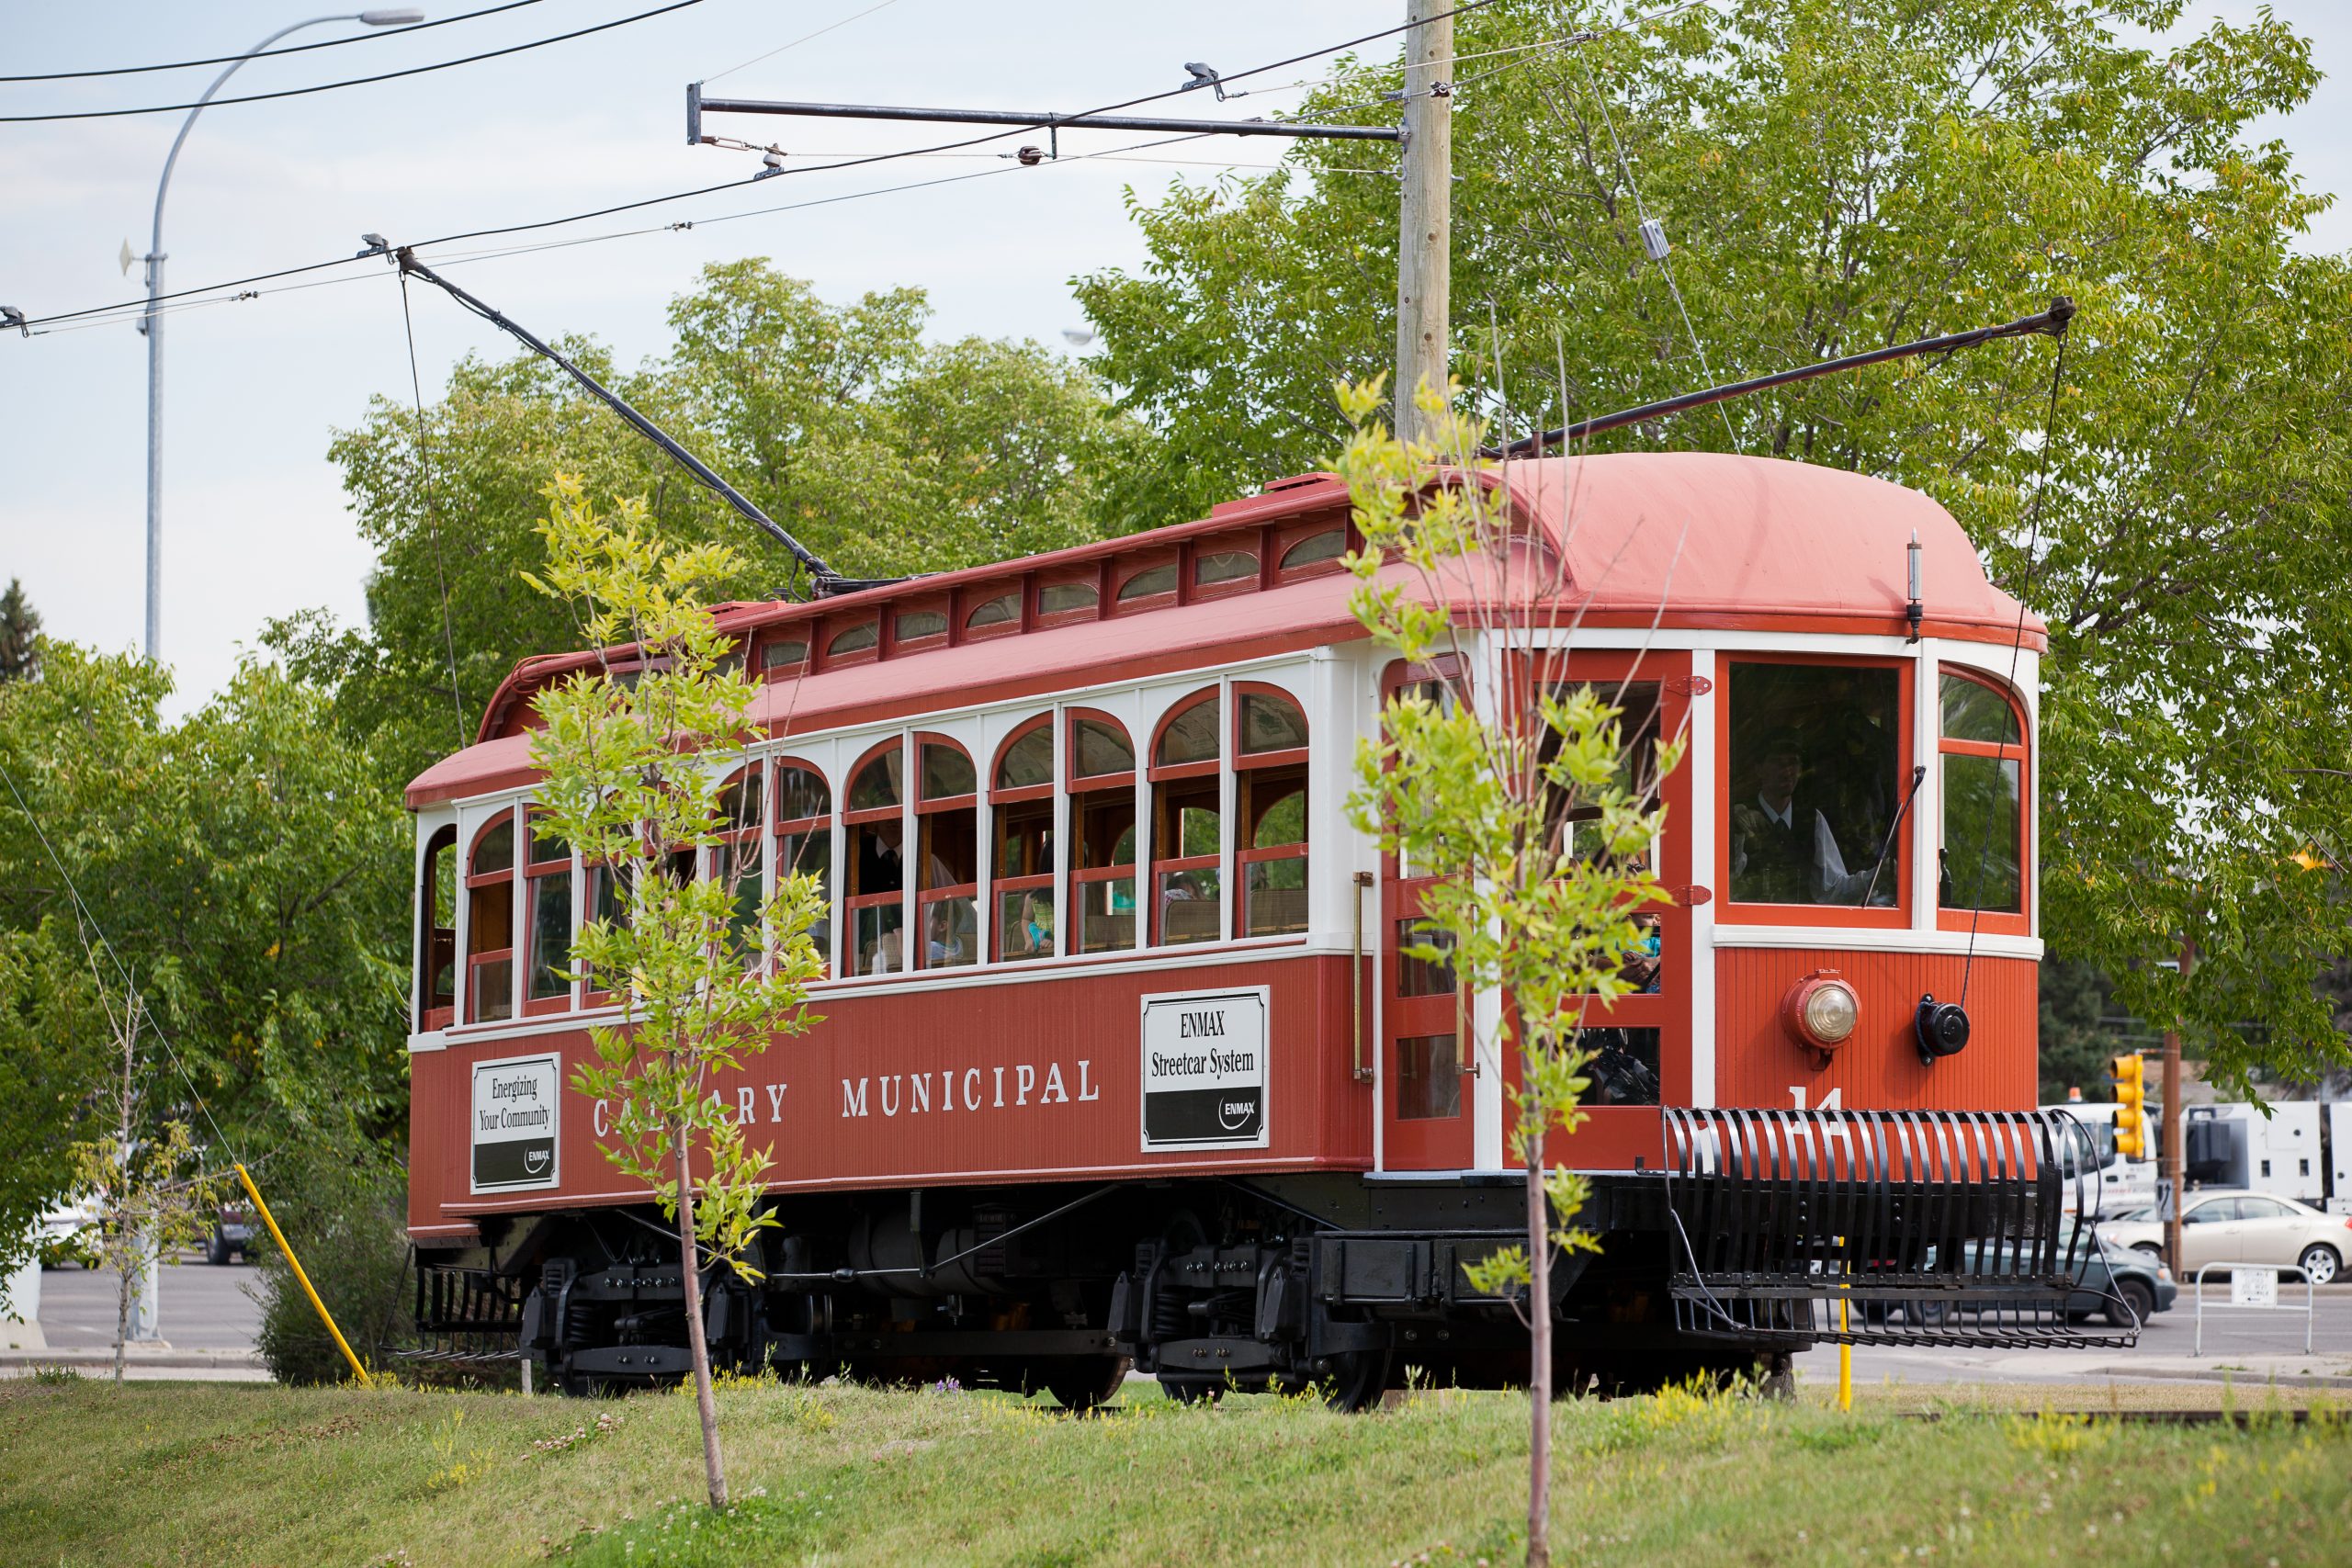 Heritage Park's electric streetcar system